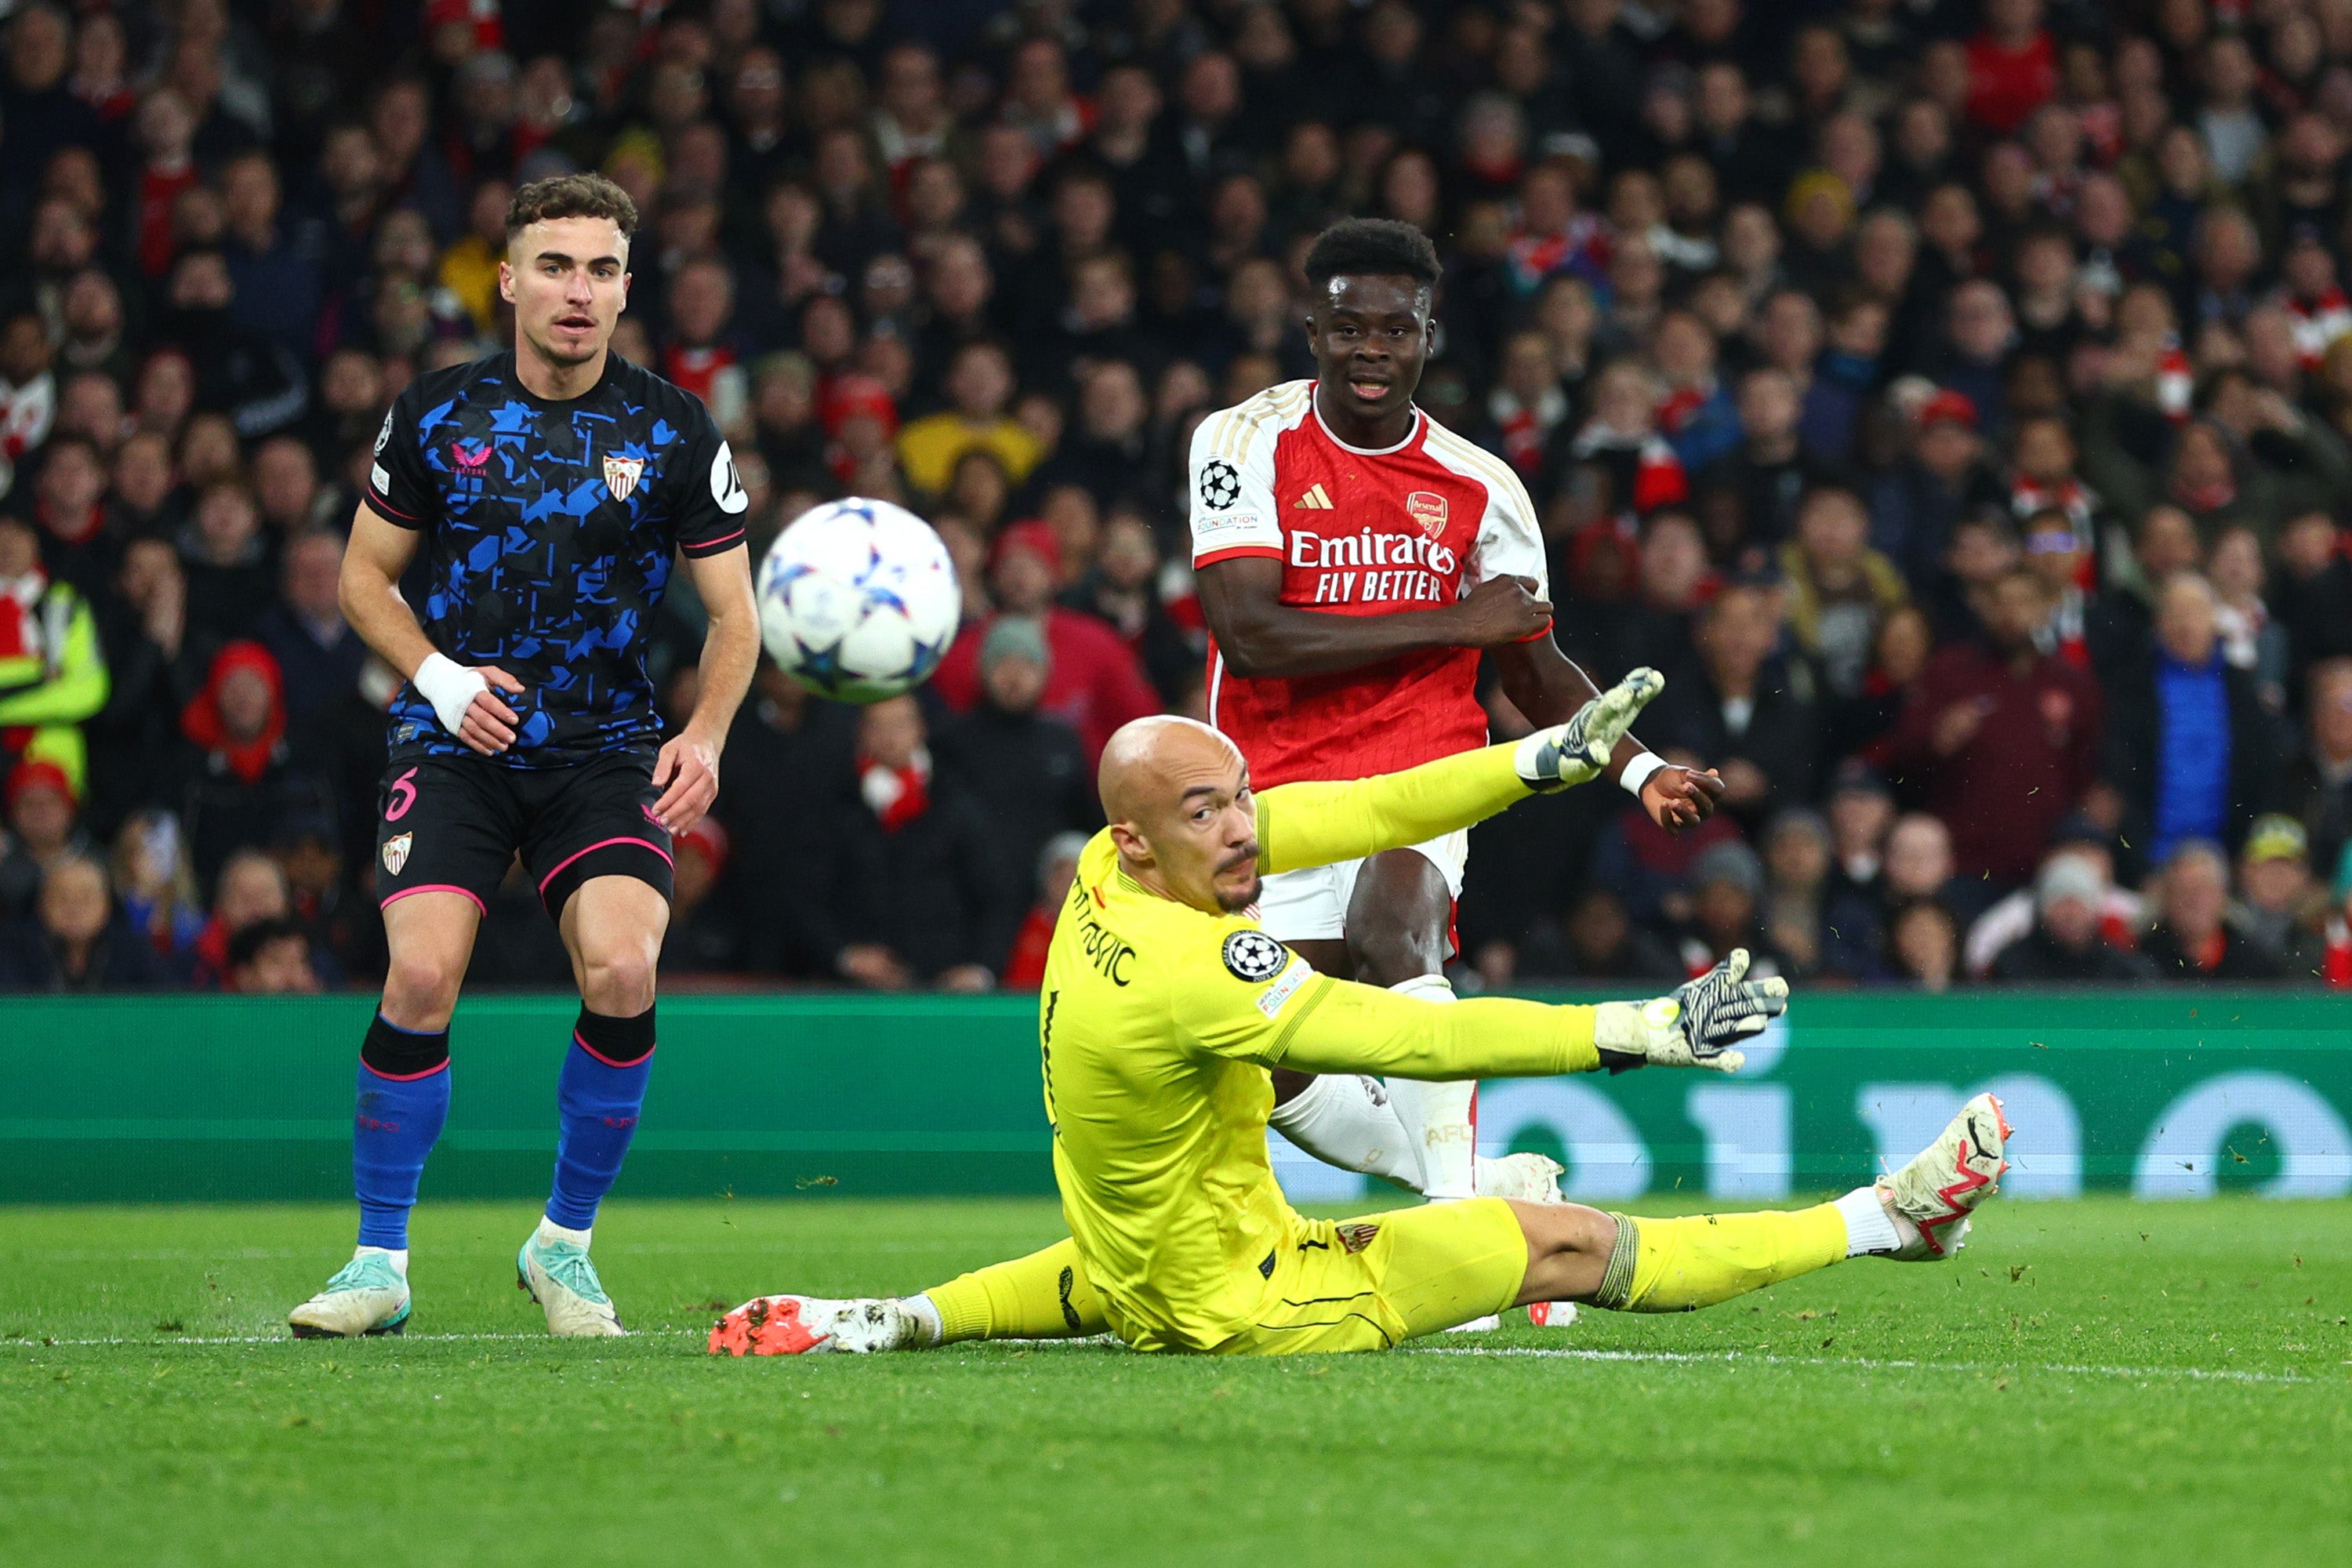 Saka ended his six-game goal drought with Arsenal’s second